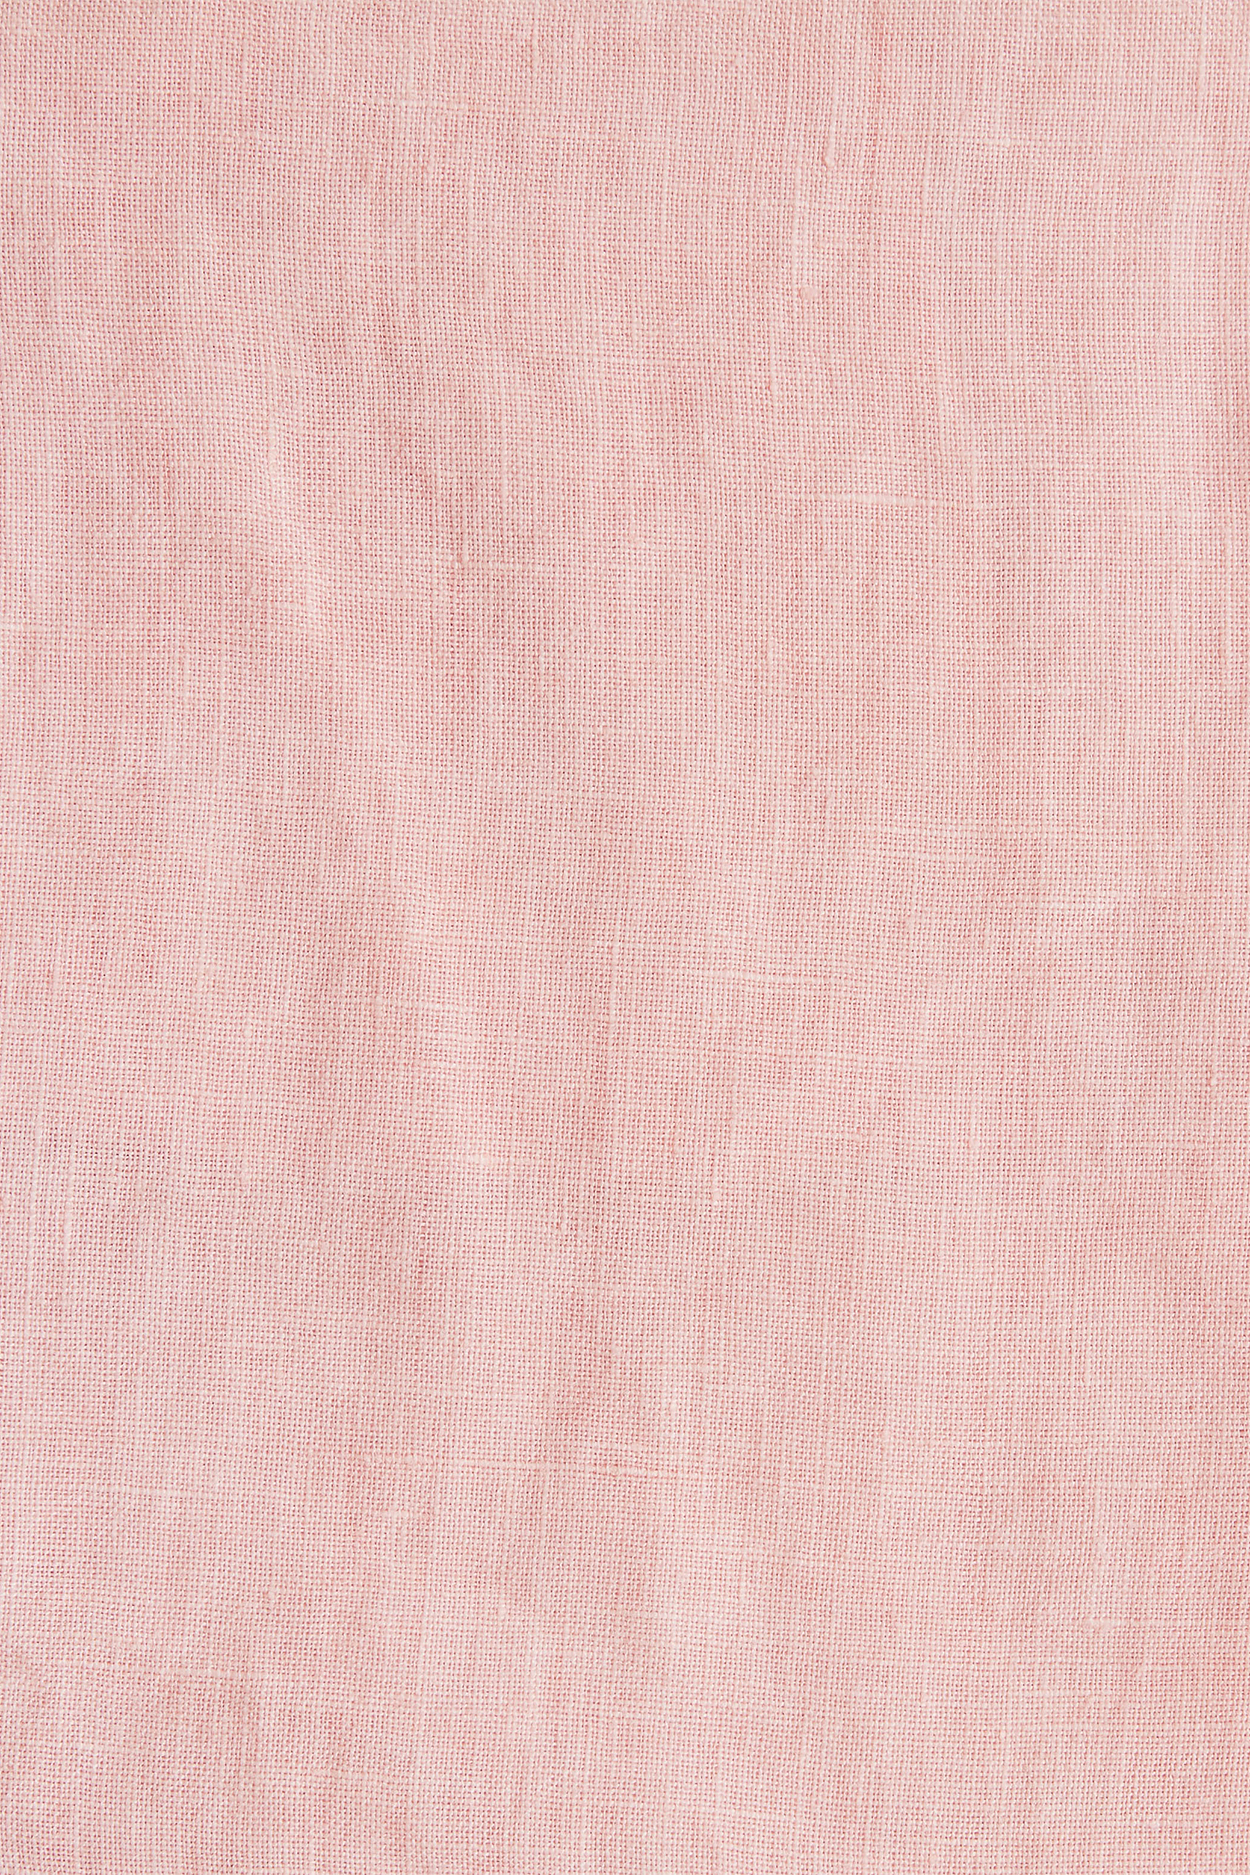 EcoLinen Gauze Pink Coral Fabric Swatch